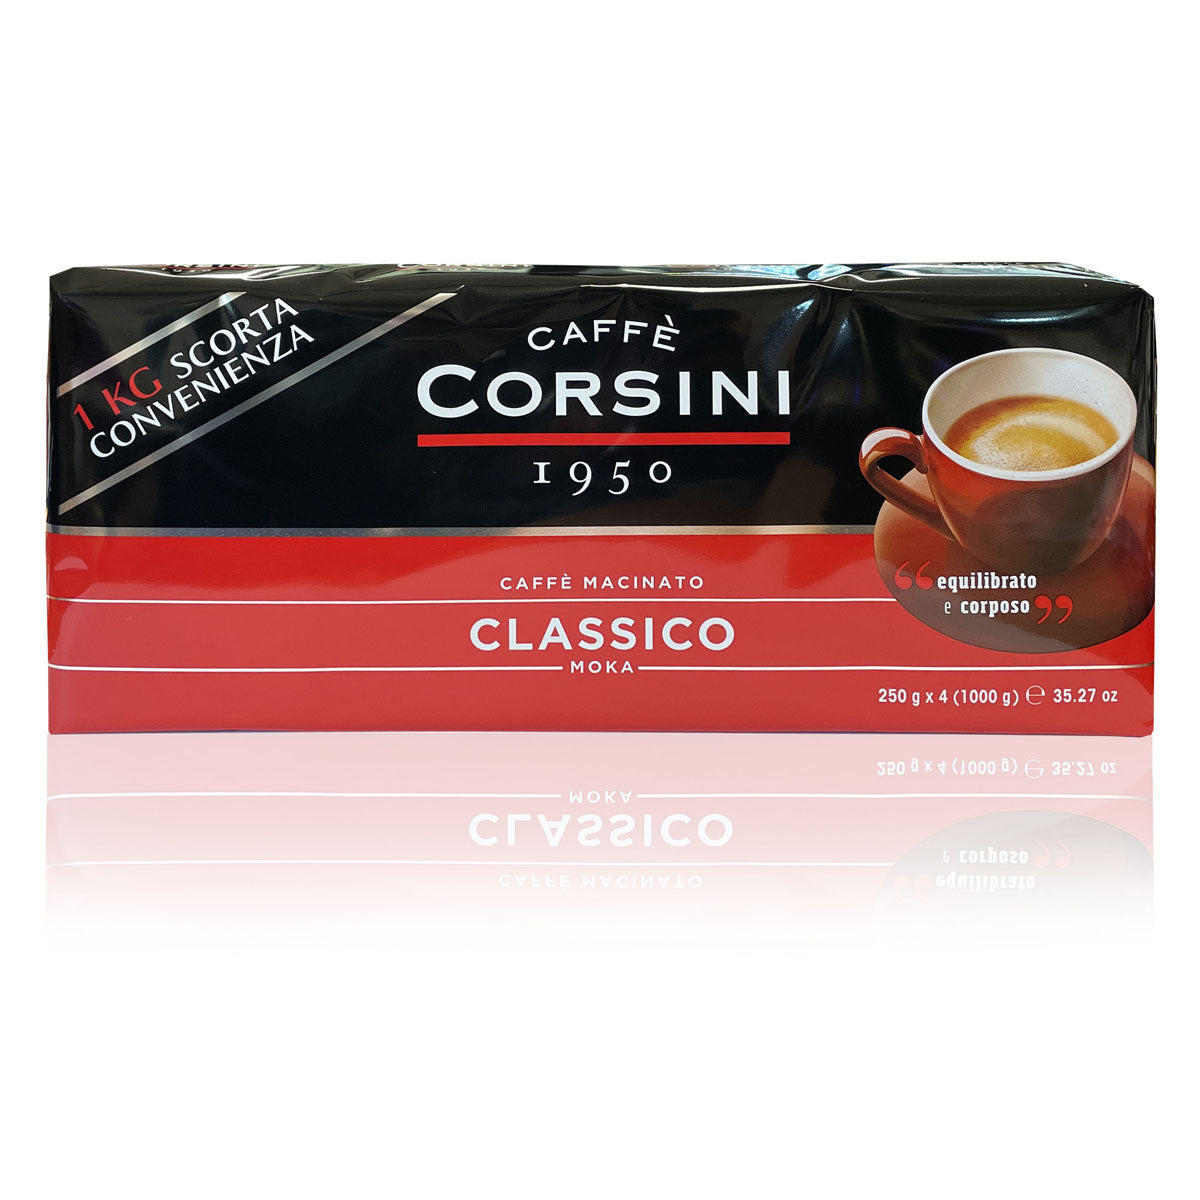 Ground coffee | Classico | Ideal for moka | Pack containing 4 packets of 250g each | Box of 5 packs